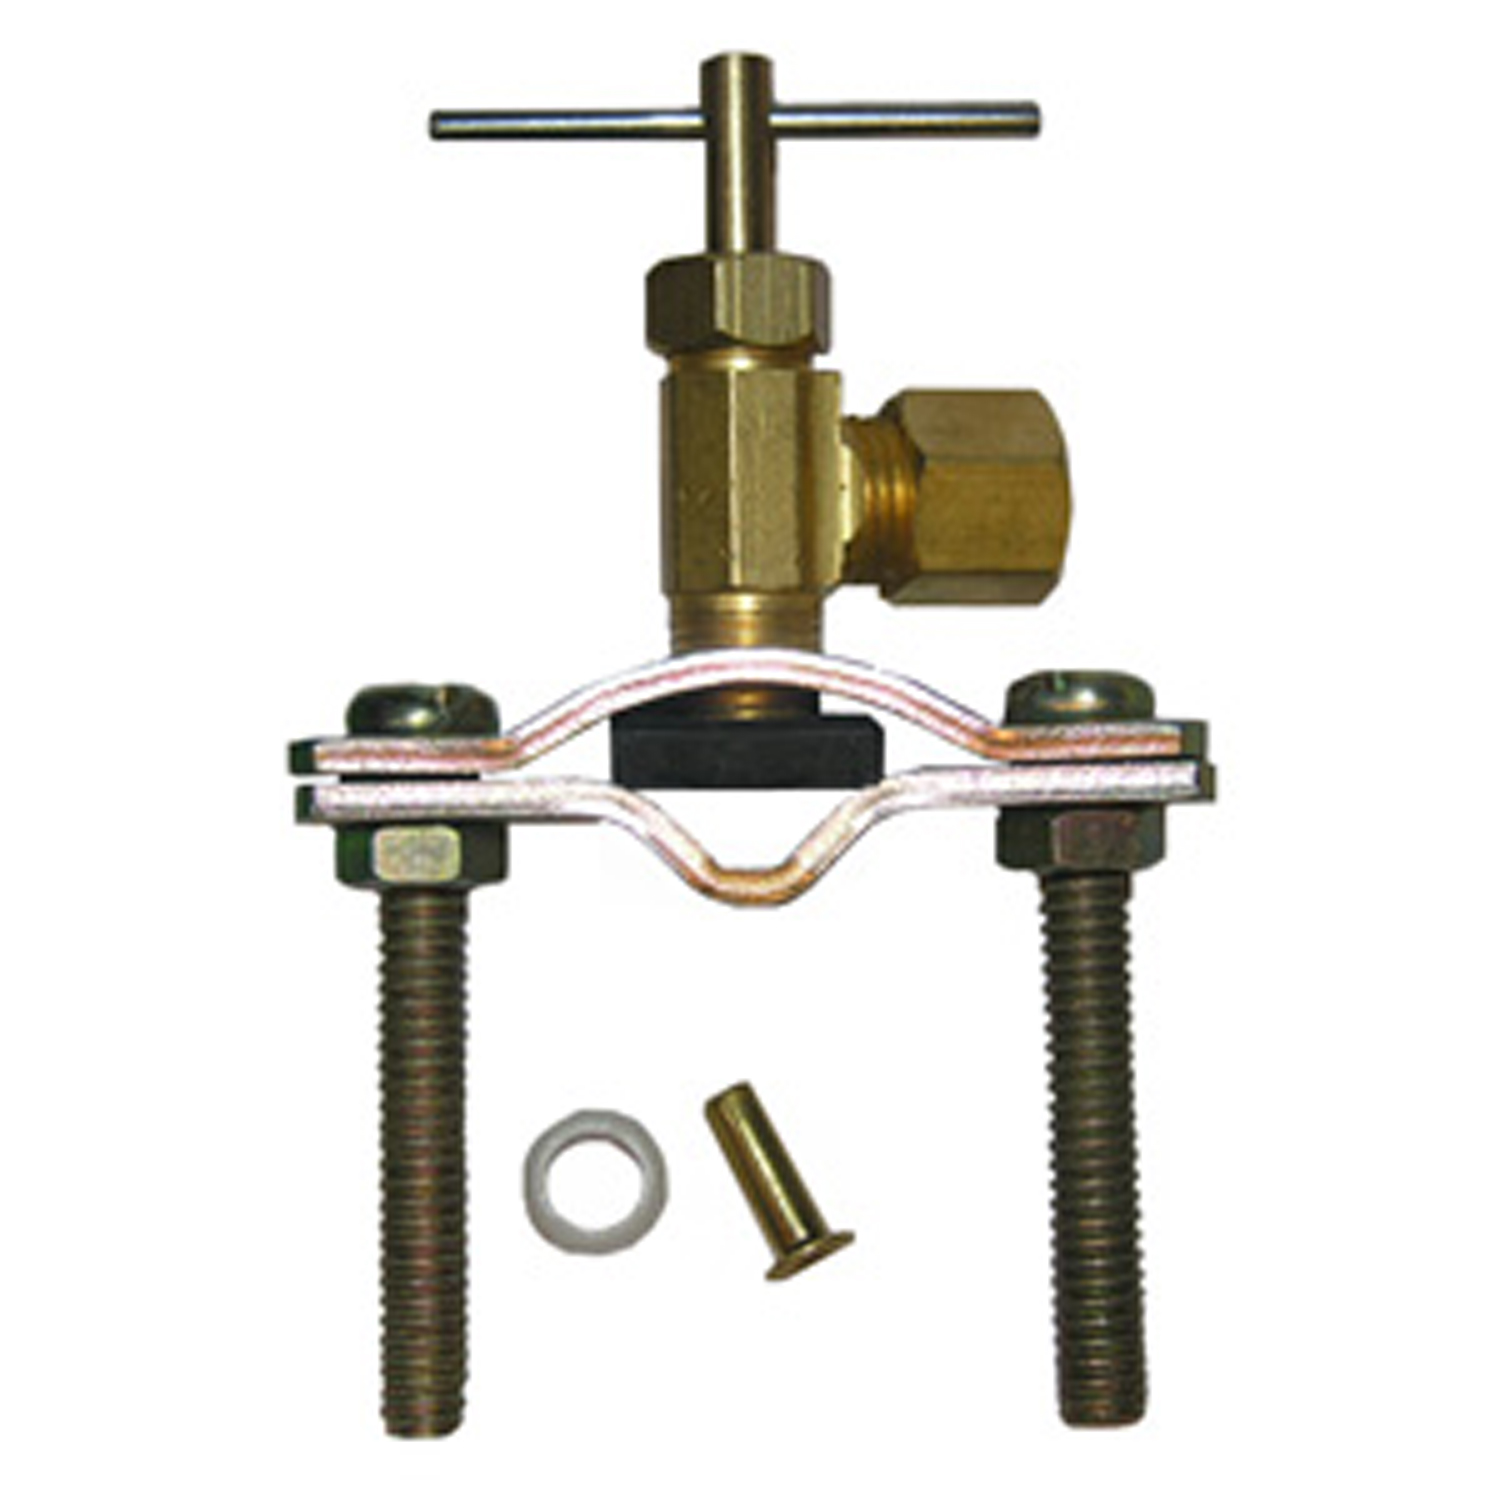 17-0601 Self-Tapping Needle Valve, 1/4 in Connection, Compression, Brass Body